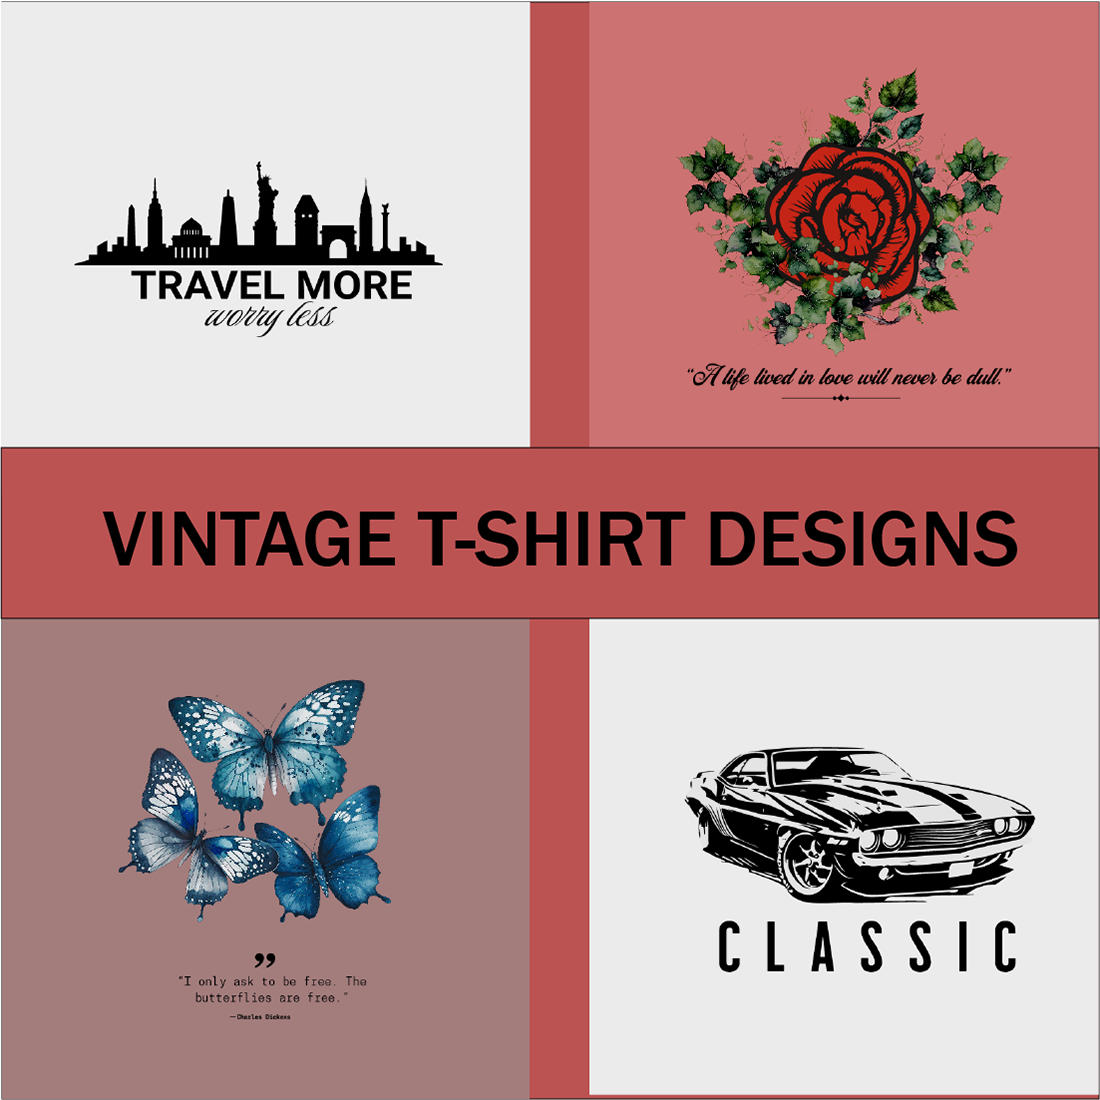 Vintage T-shirts designs retro collection cover image.